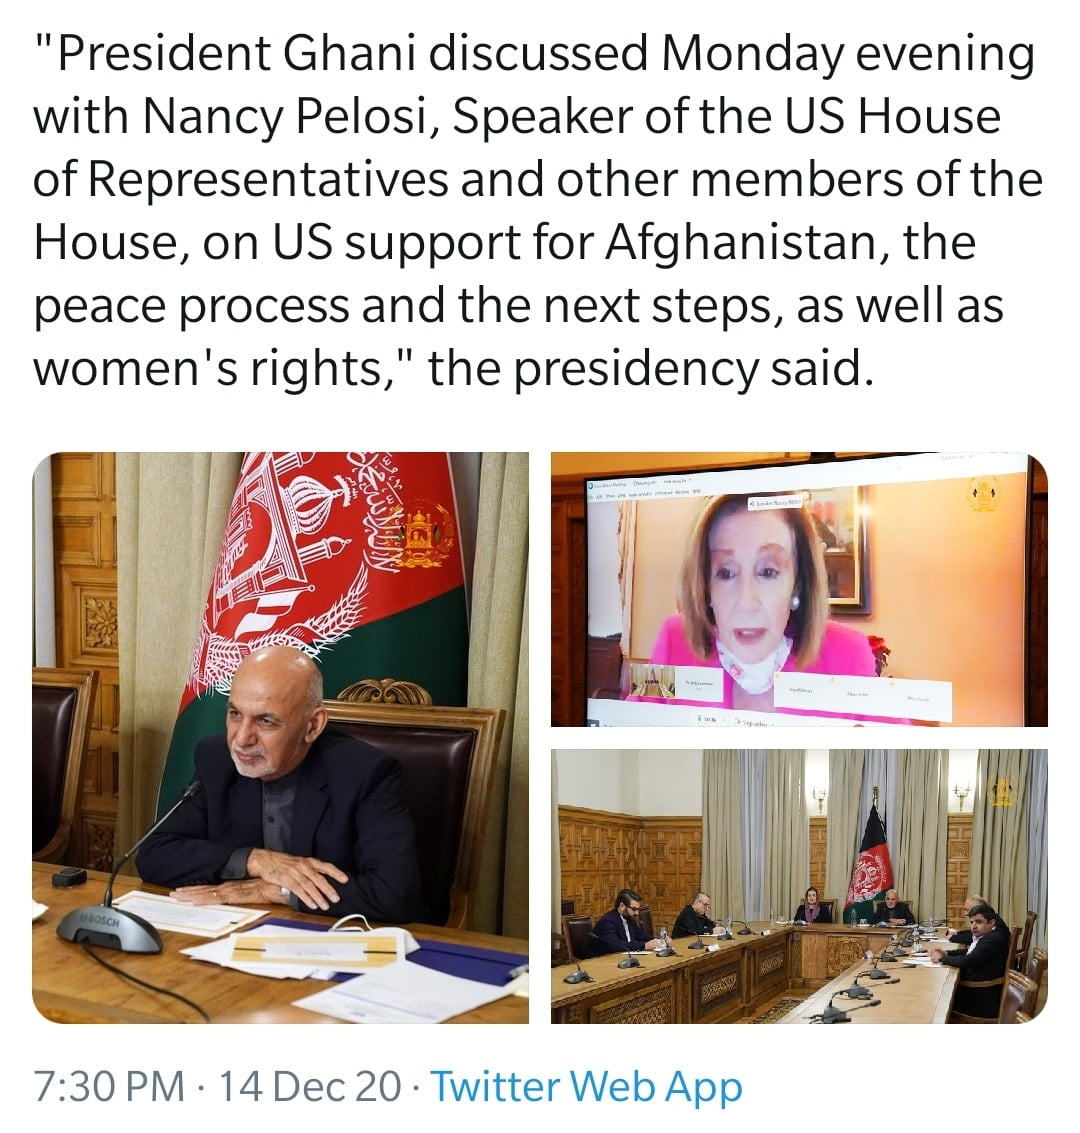 Ghani consulting with Pelosi on peace process. That's just...